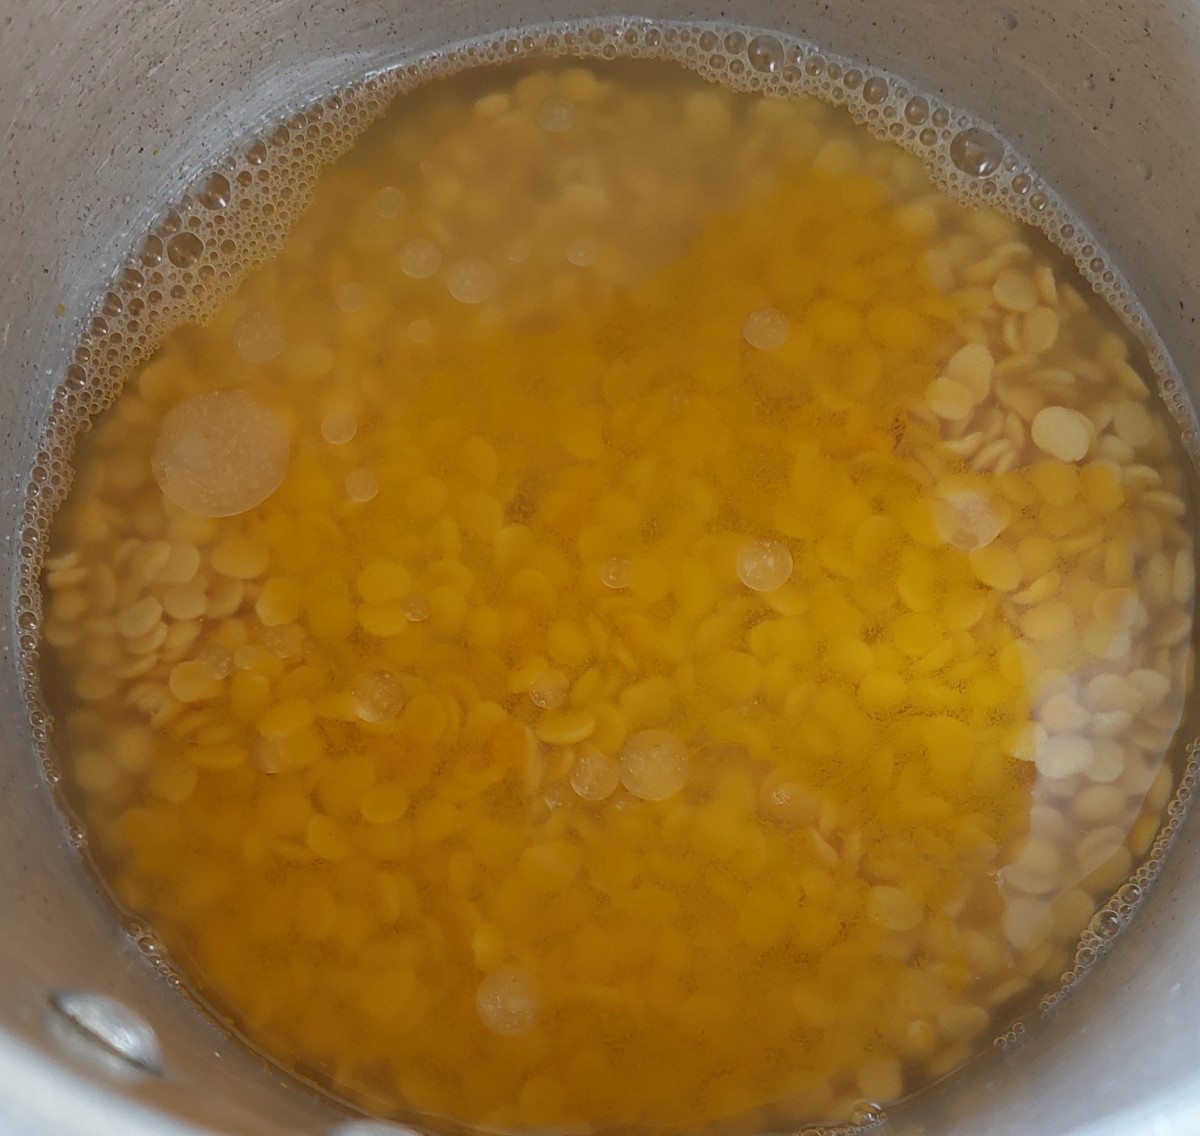 Transfer soaked lentils to a cooker. Add 1 cup of water and 1/2 teaspoon of turmeric powder